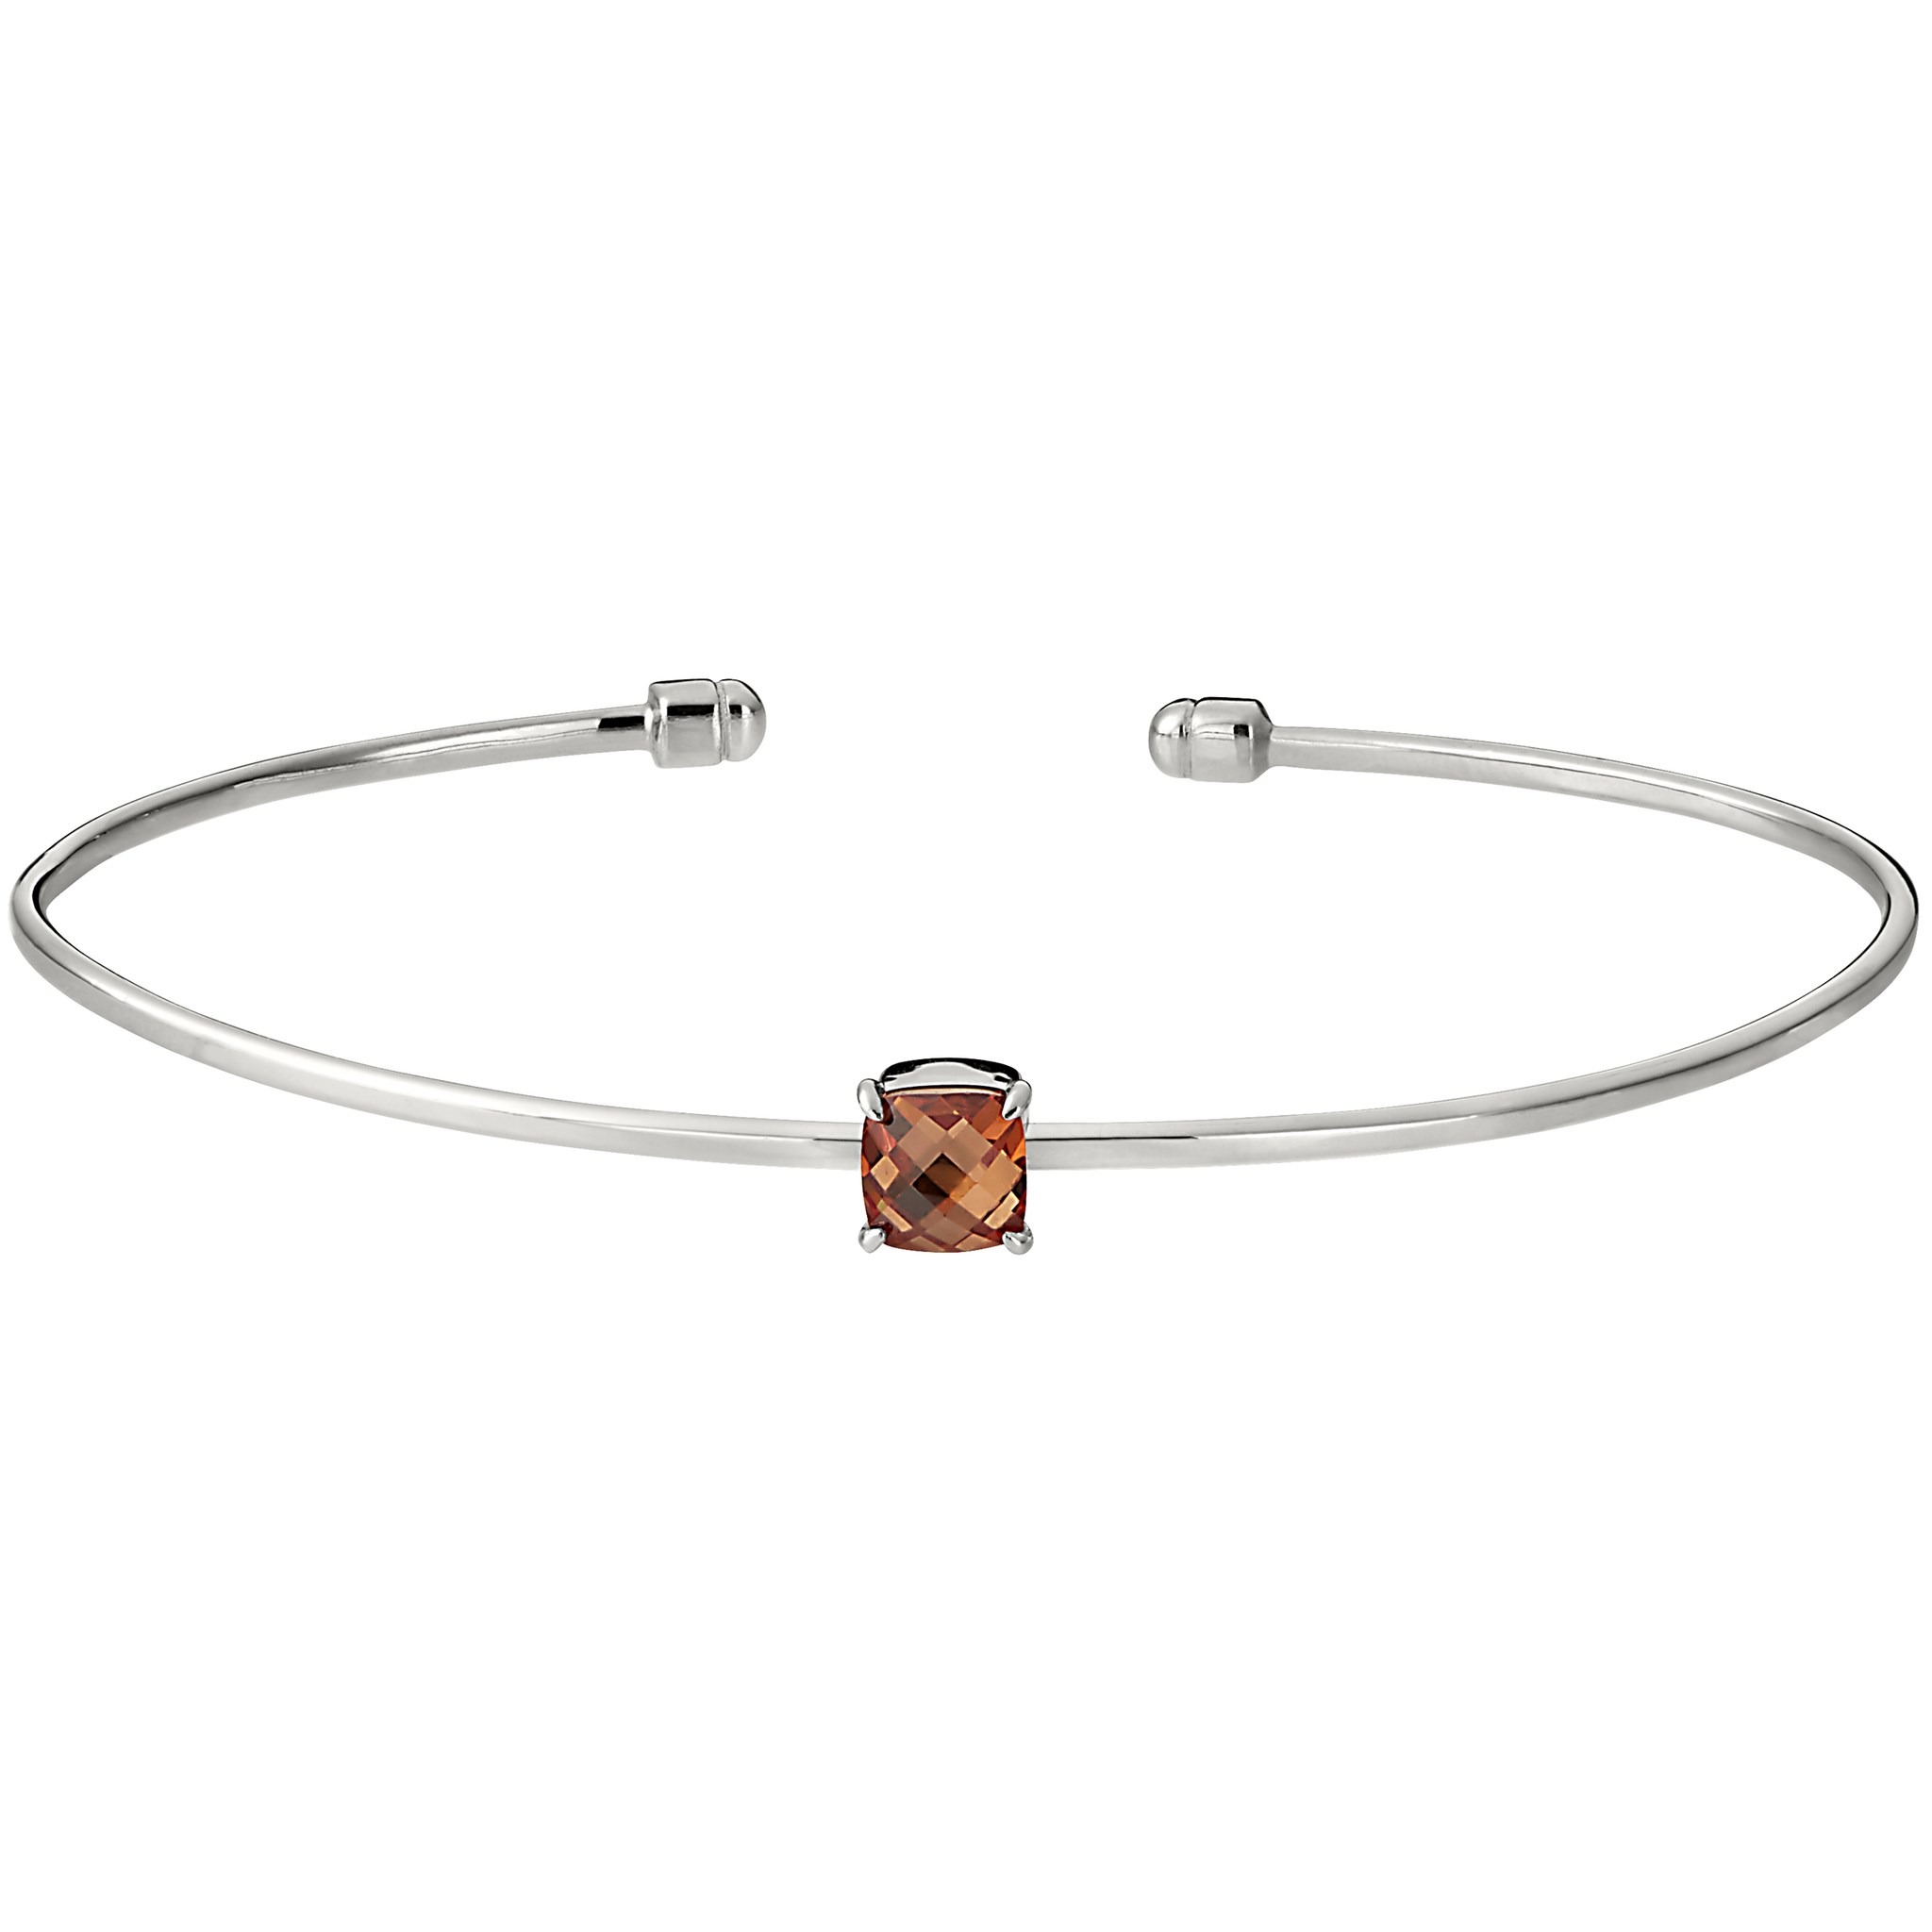 Rhodium Finish Sterling Silver Pliable Cuff Bracelet with Faceted Cushion Cut Simulated Citrine Birth Gem - November